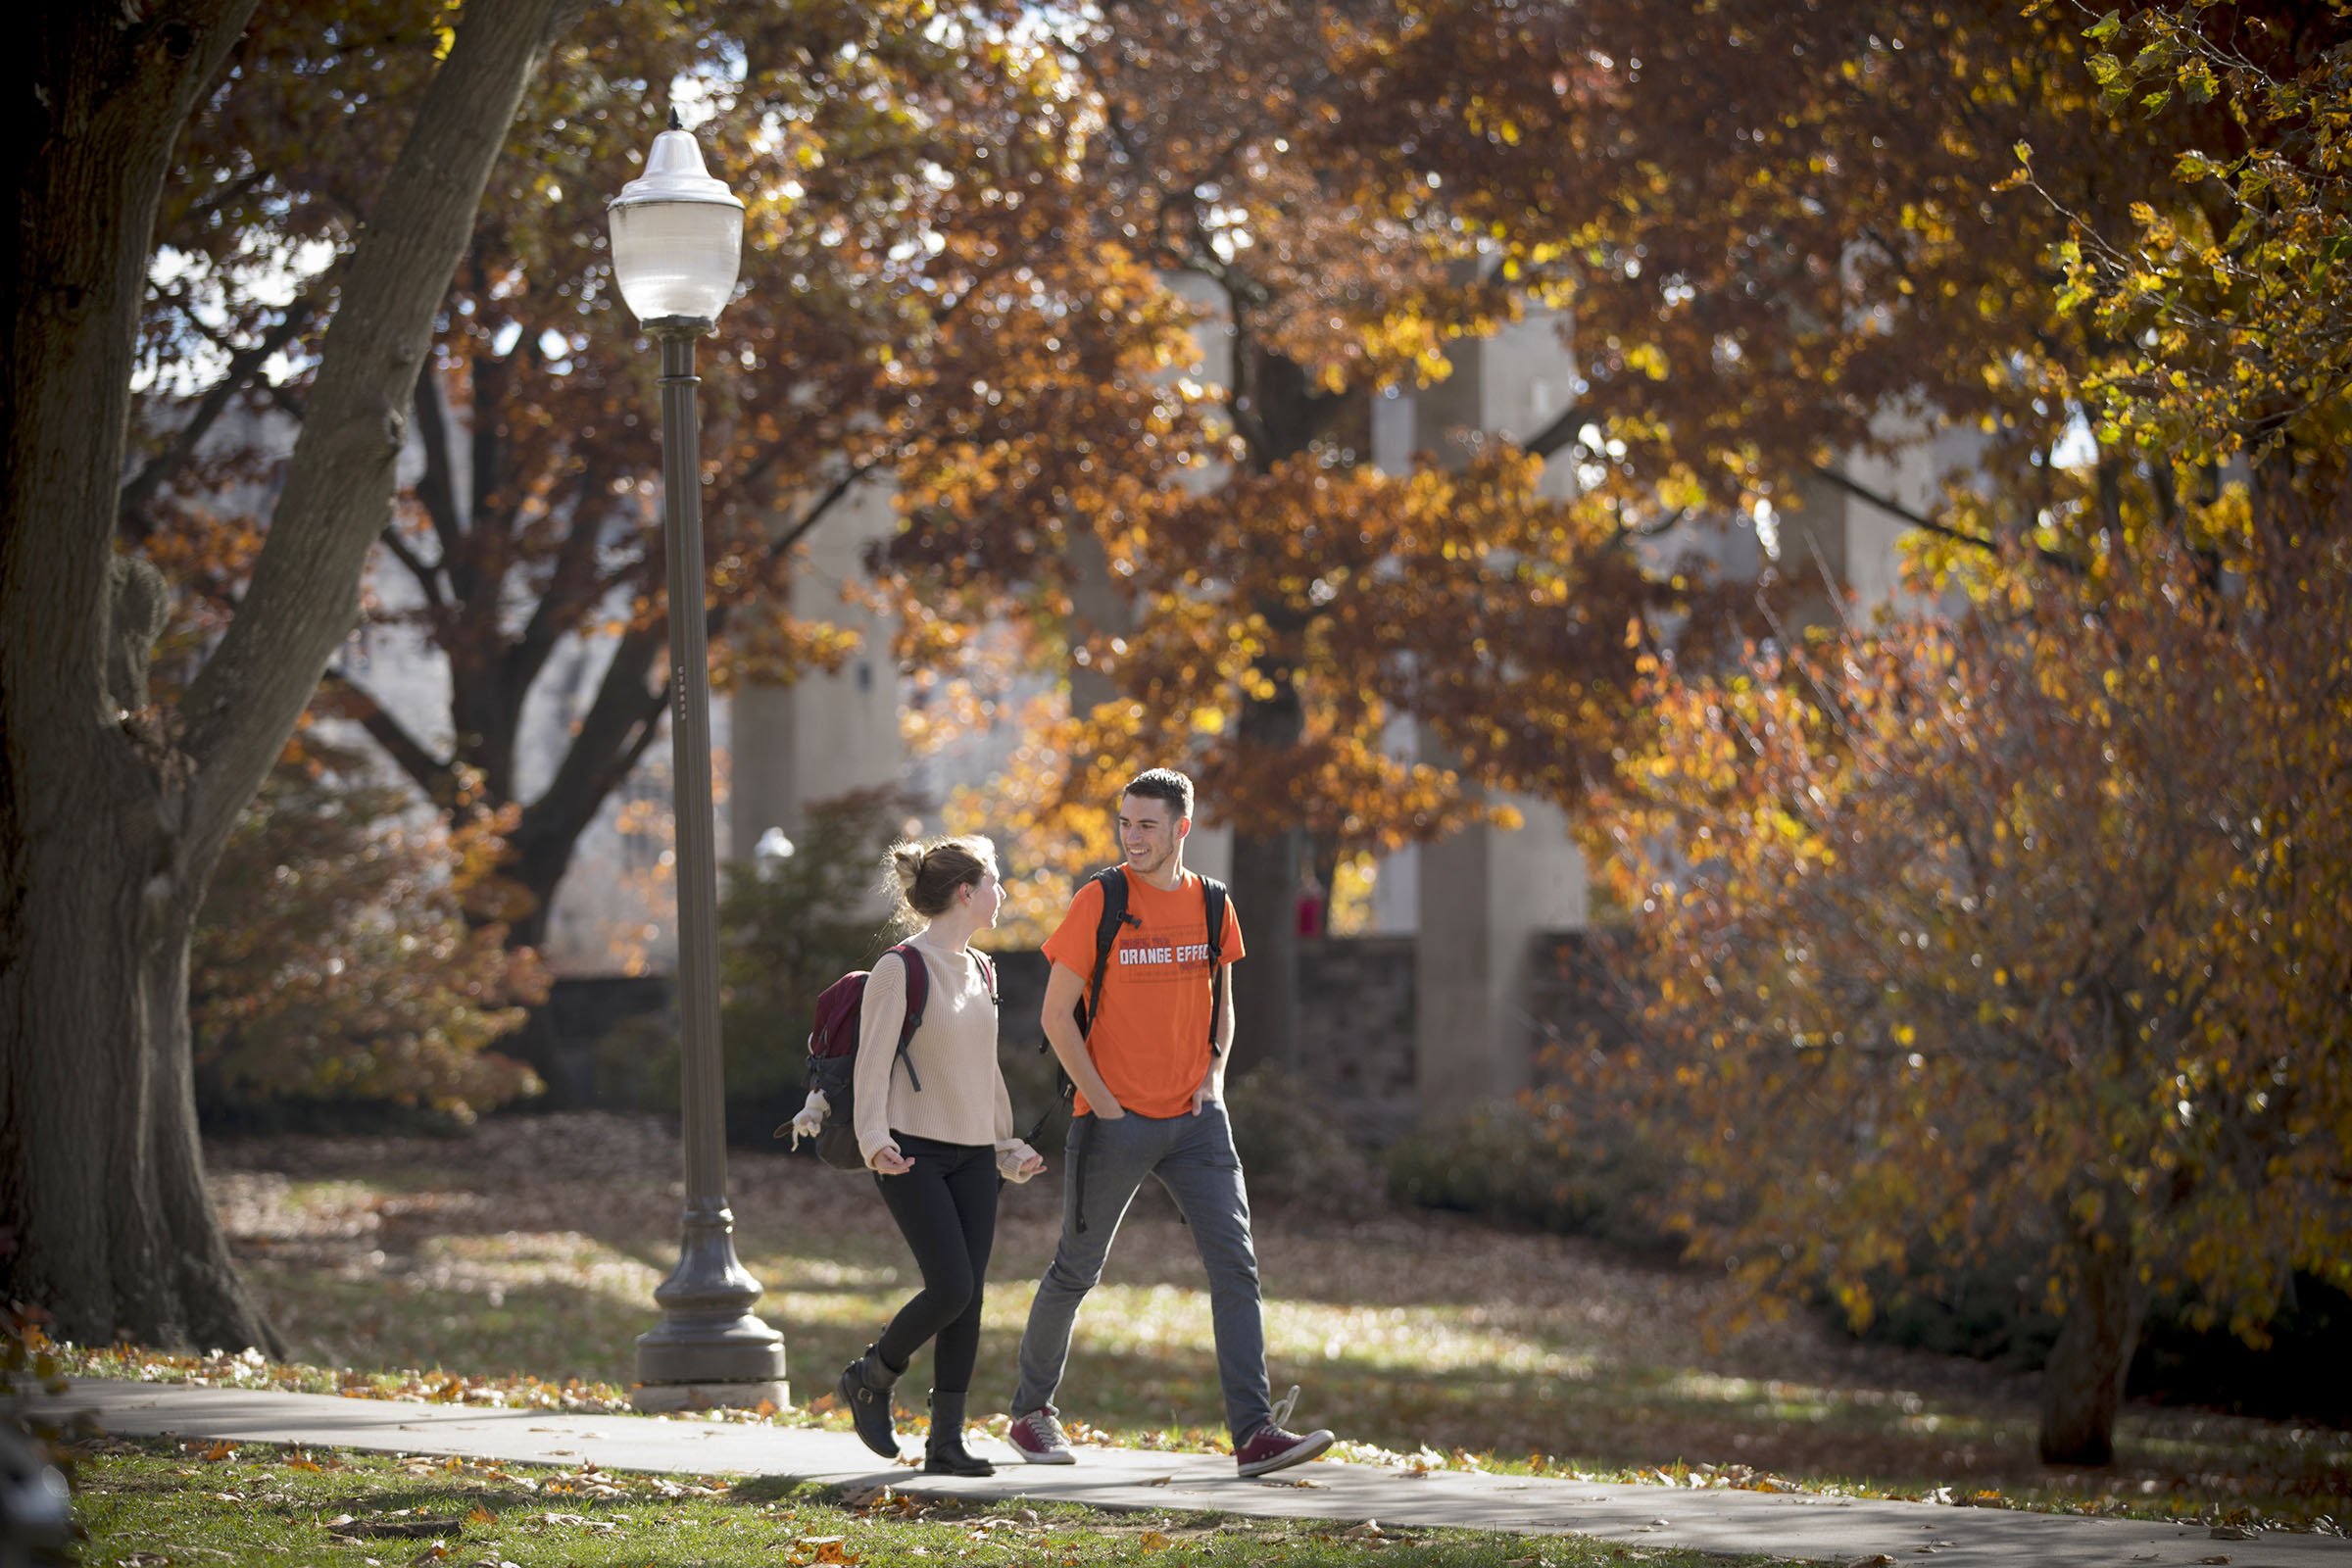 From cultural student unions, to local food bank volunteers, from disciplinary honor societies, to sports and outdoor clubs, Virginia Tech's over 900 student organizations give you a community where you can belong.